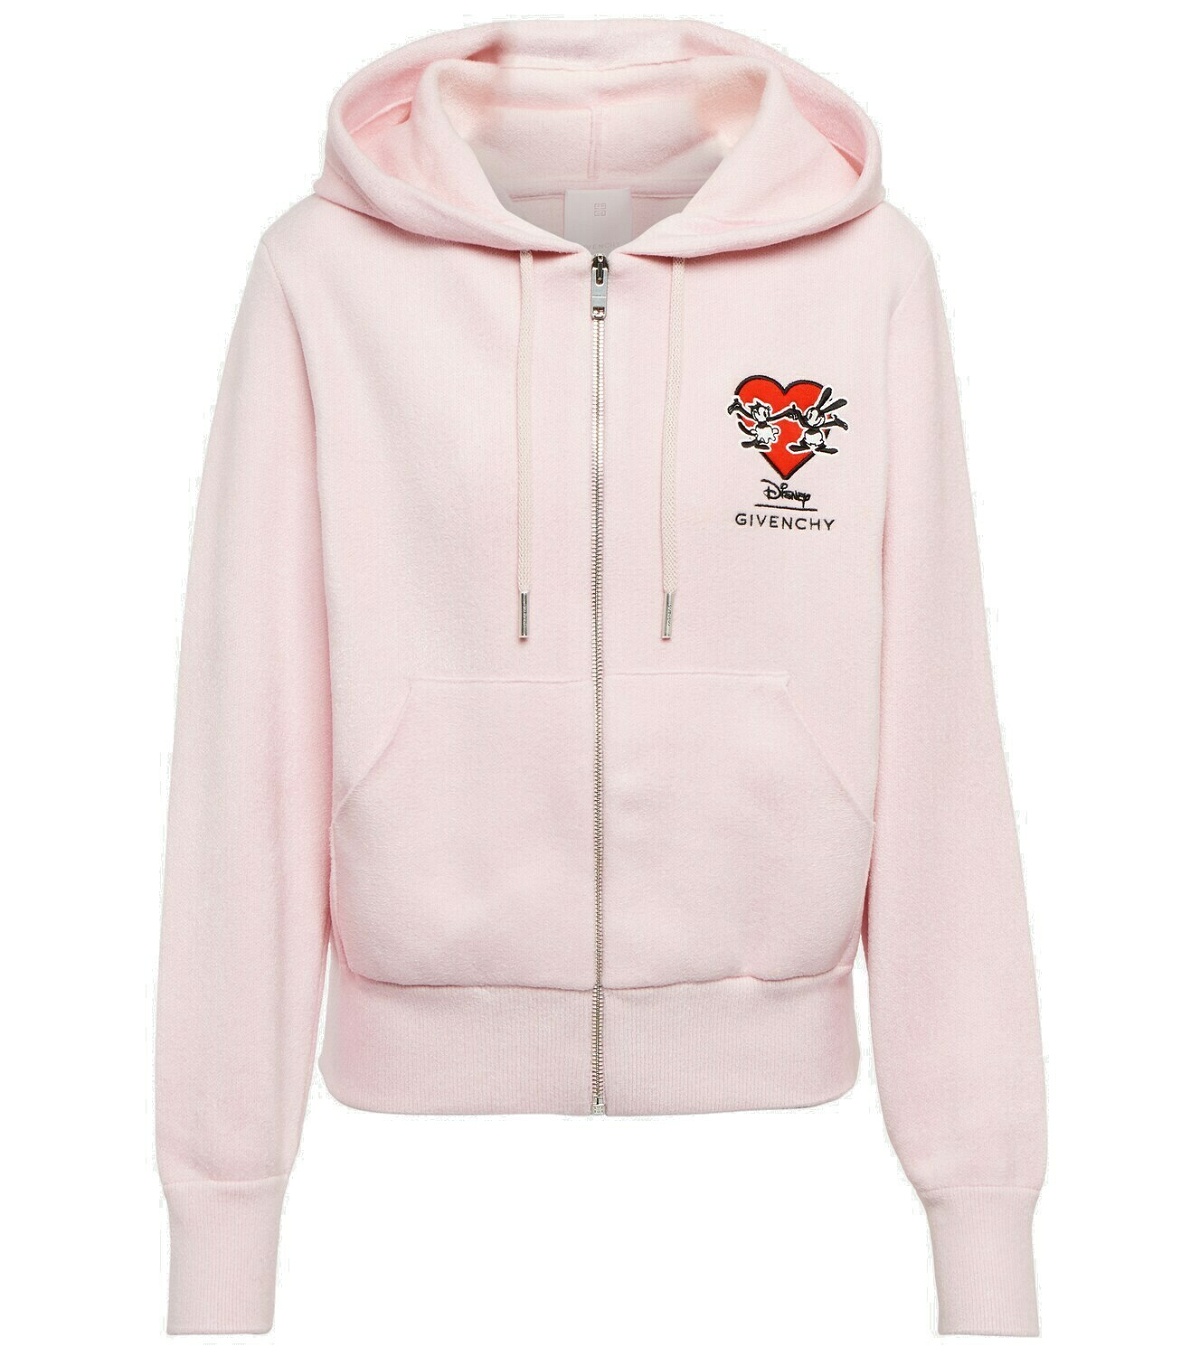 Givenchy - x Disney® embroidered zipped hoodie Givenchy